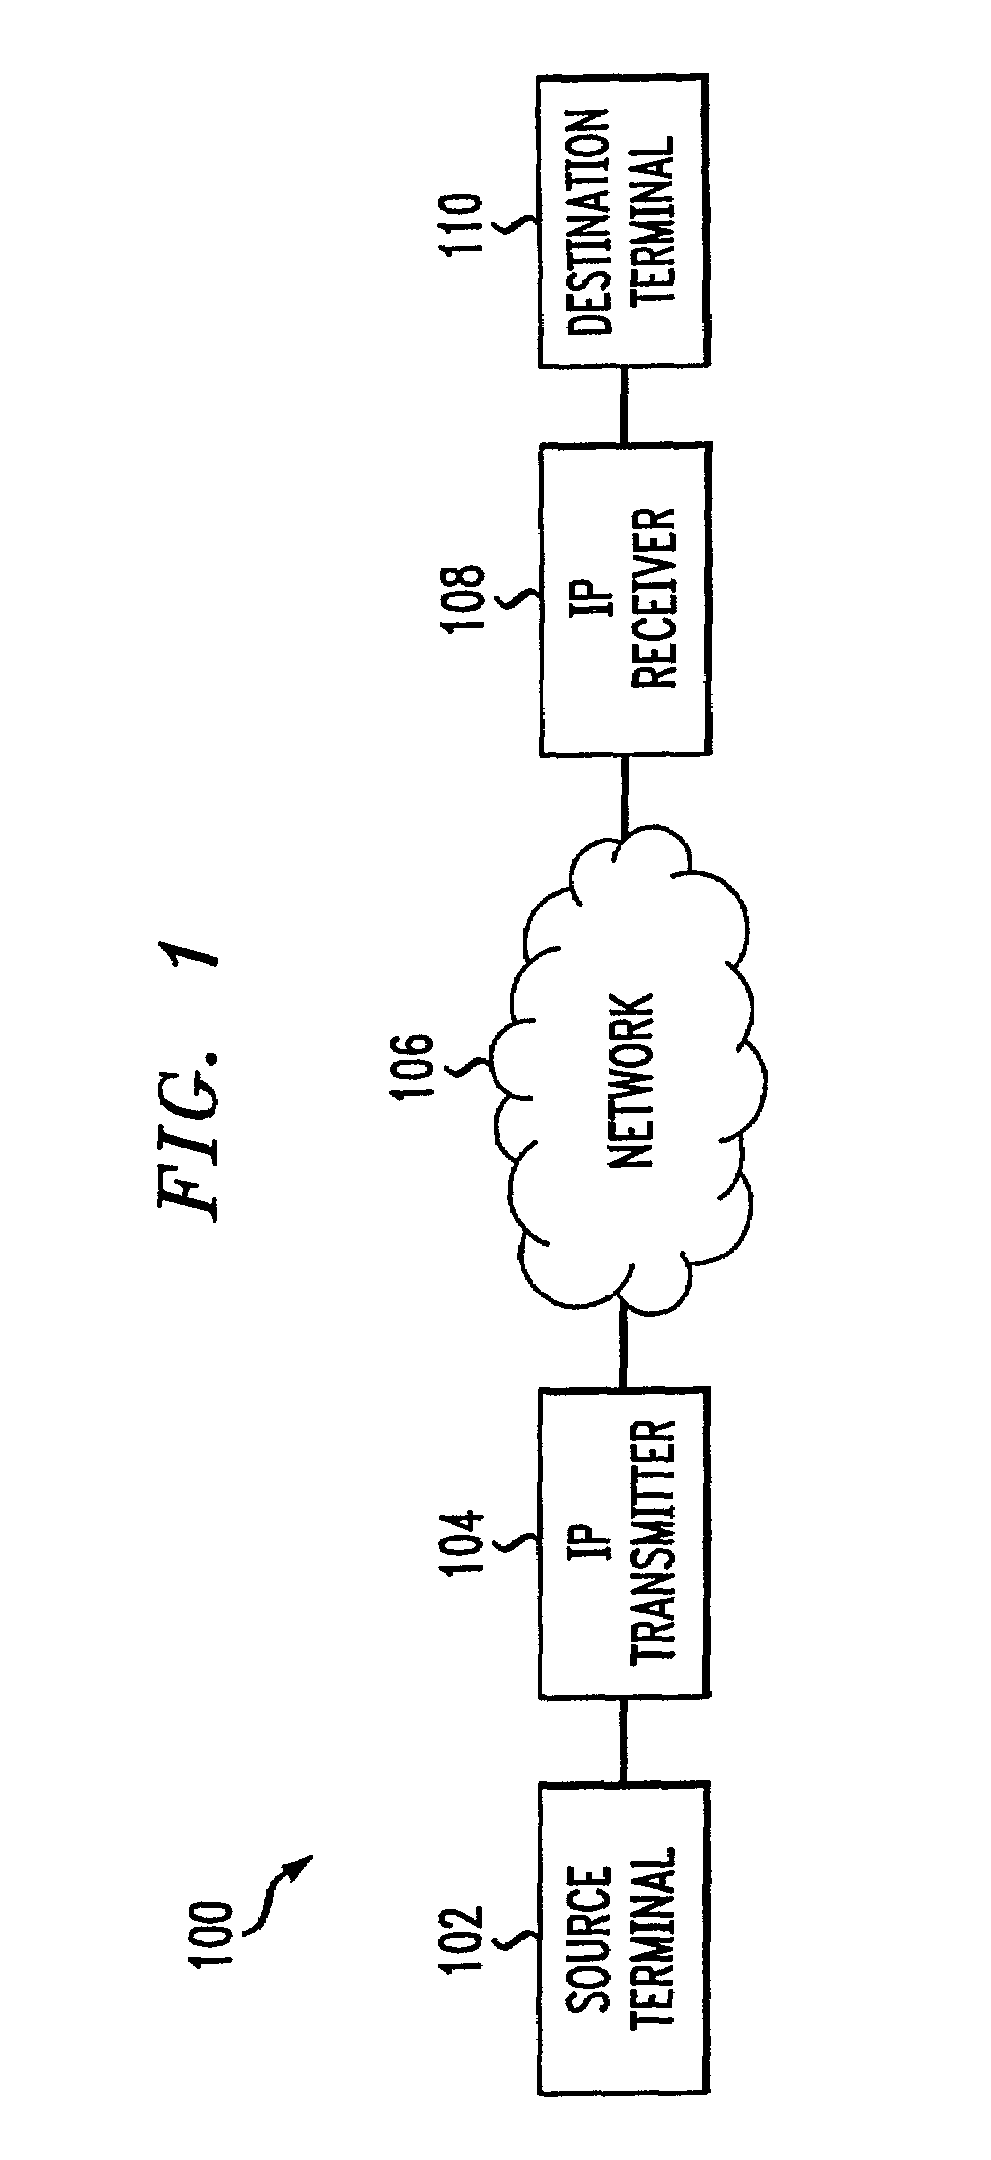 Dynamic jitter buffering for voice-over-IP and other packet-based communication systems